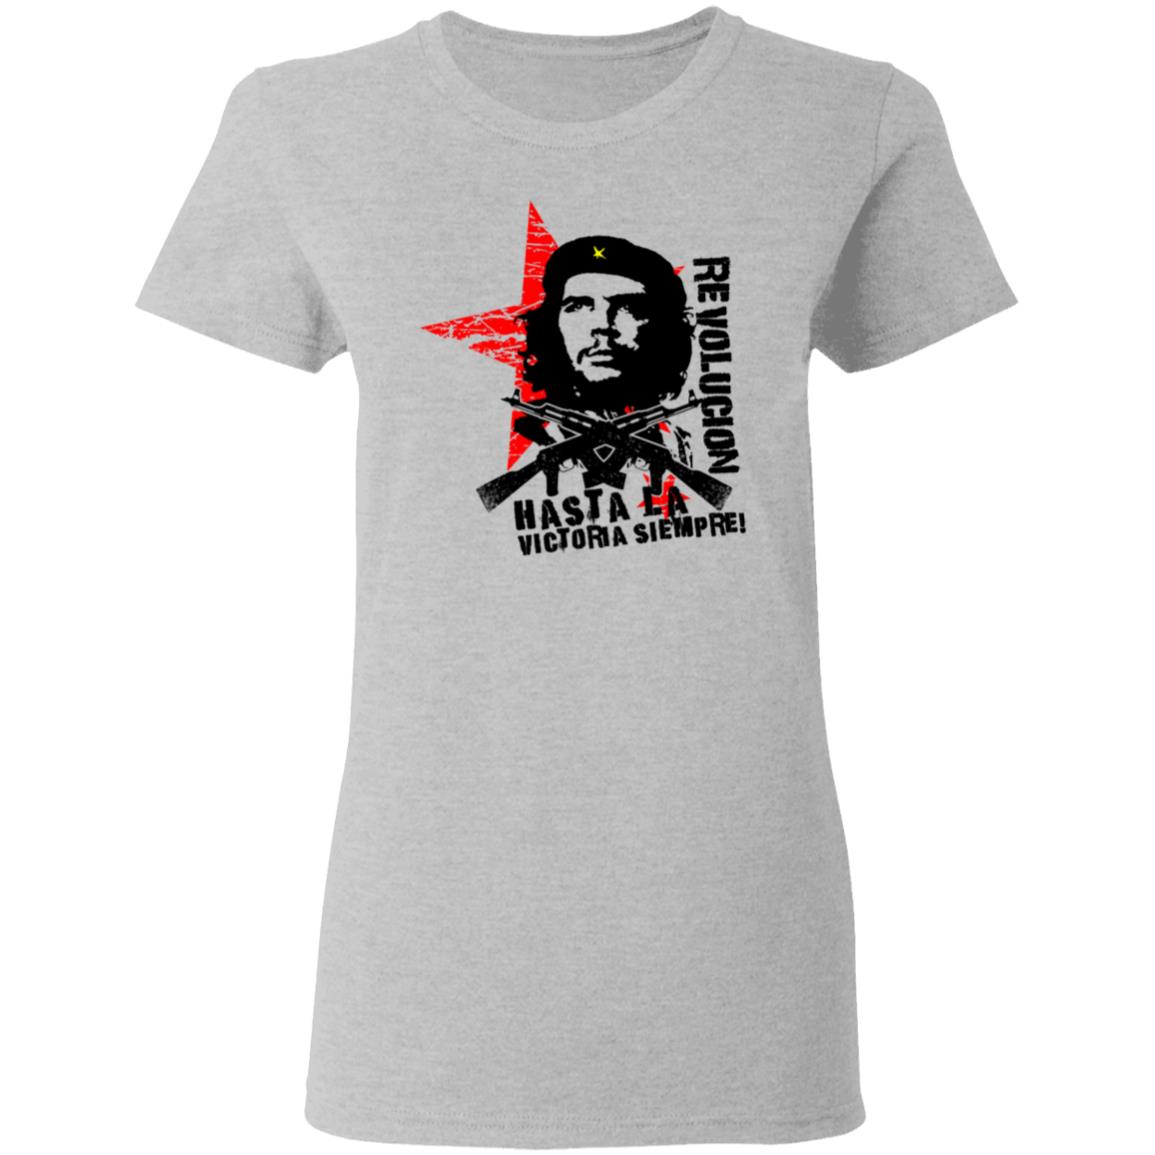 One Day at a Time Calls Out the Che Guevara T-Shirt in One Perfect